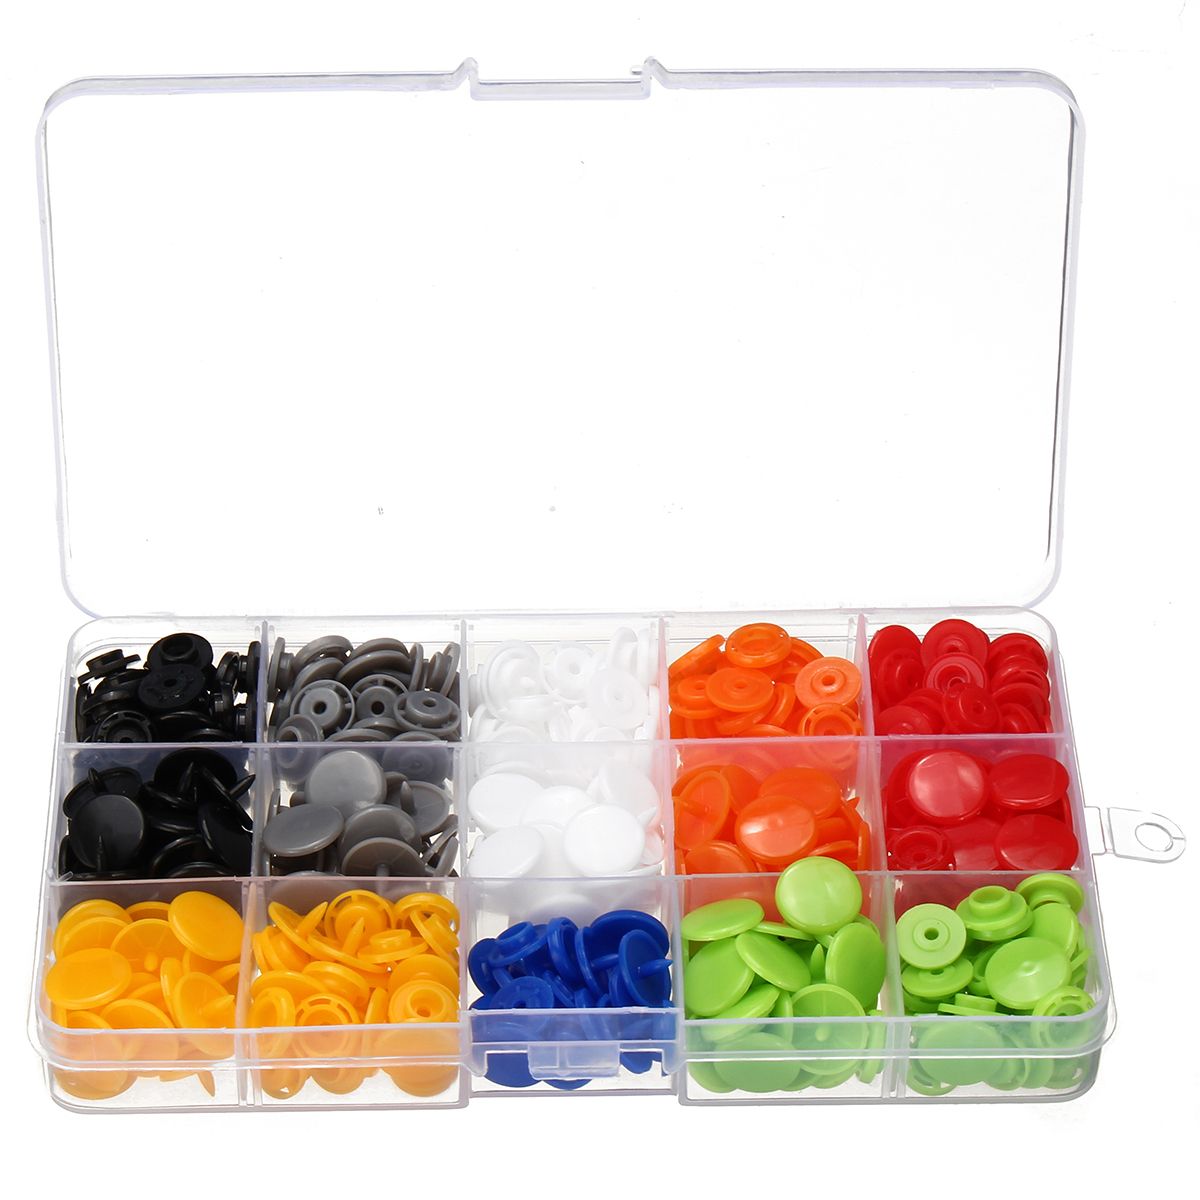 150Set-Plastic-Resin-Press-Studs-Sewing-Button-Clothes-Snap-FastenersPlier-Tools-1543375